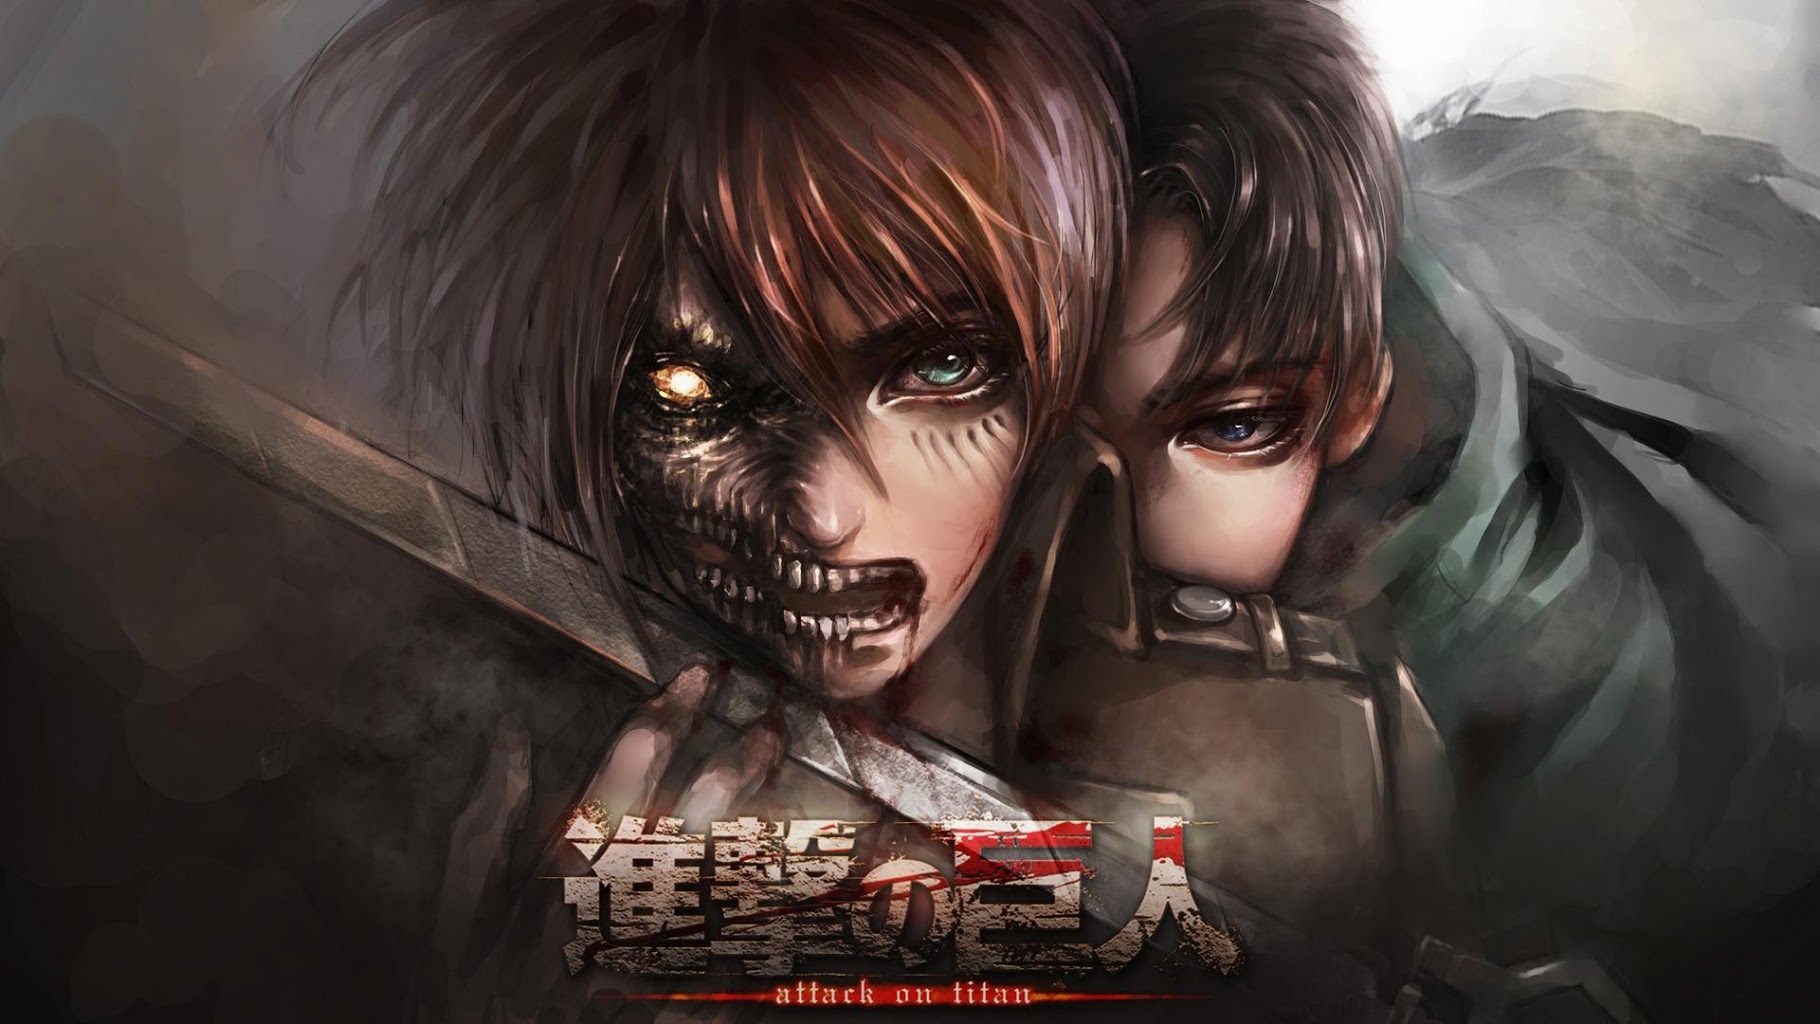 Attack on Titan HD Wallpaper for android Attack on Titan HD Wallpaper